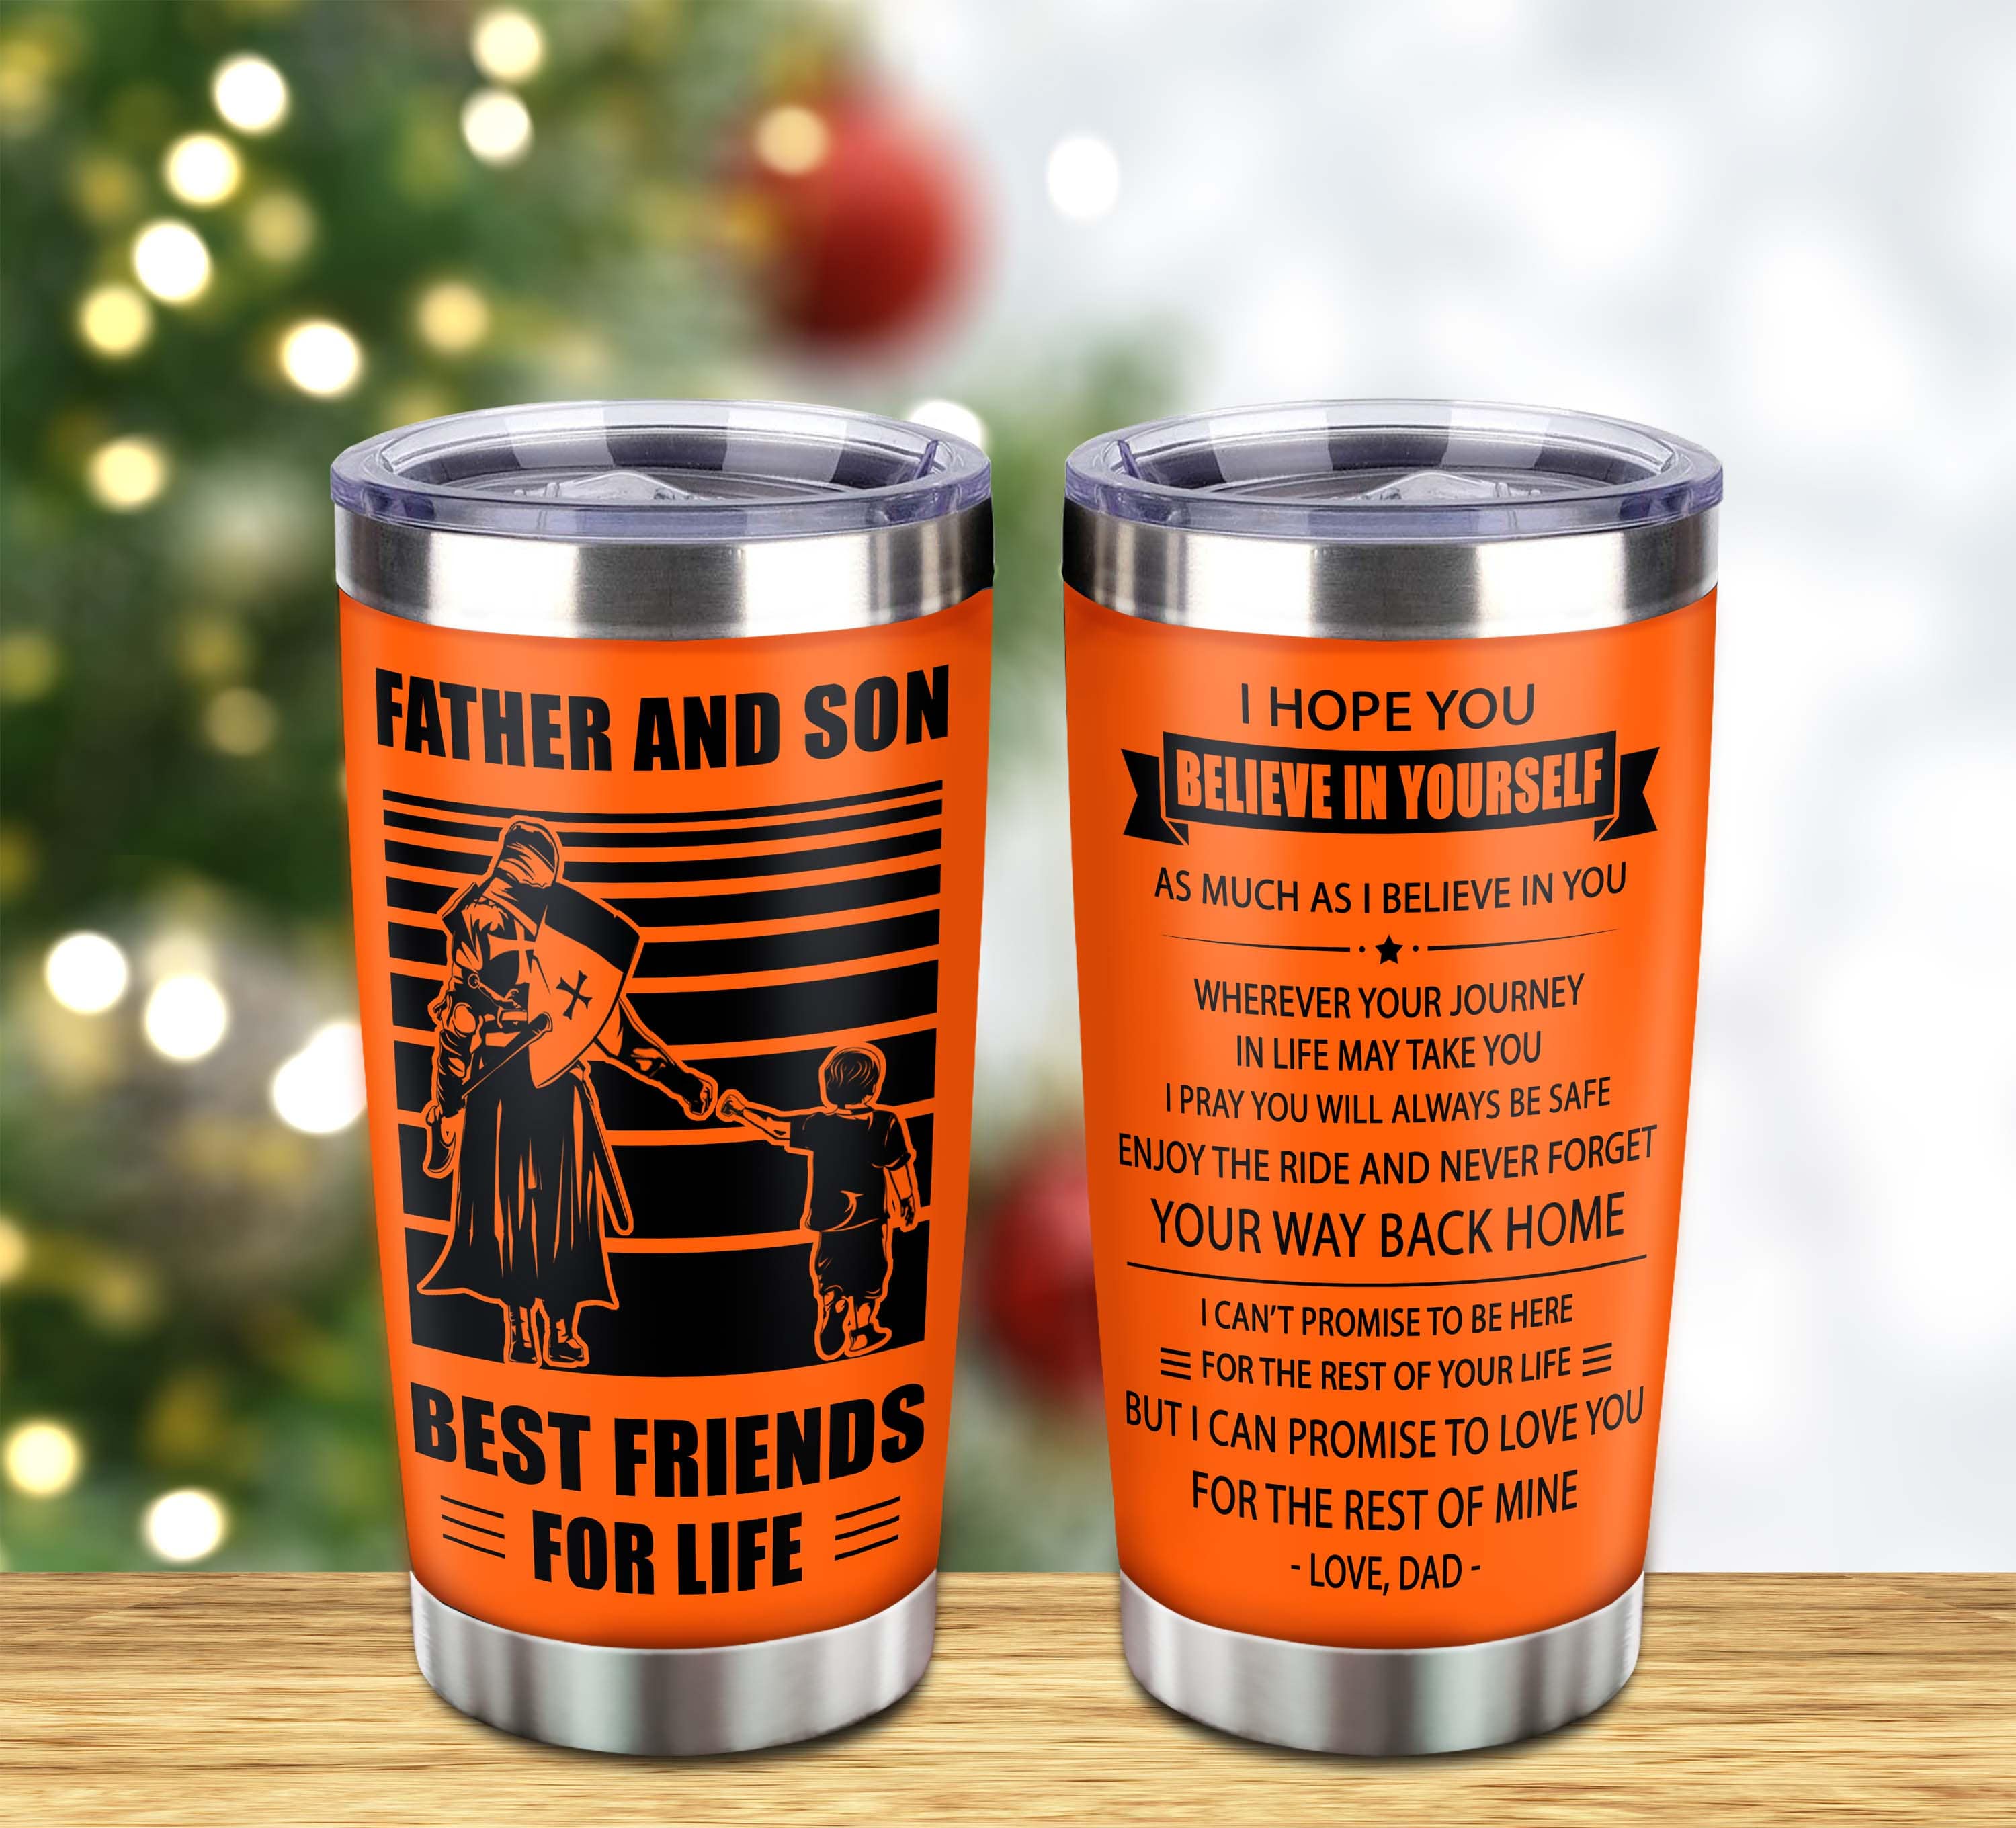 Customizable DRB tumbler, gifts from Dad To Son Father And Son Best Friend For Life With Inspriration Message